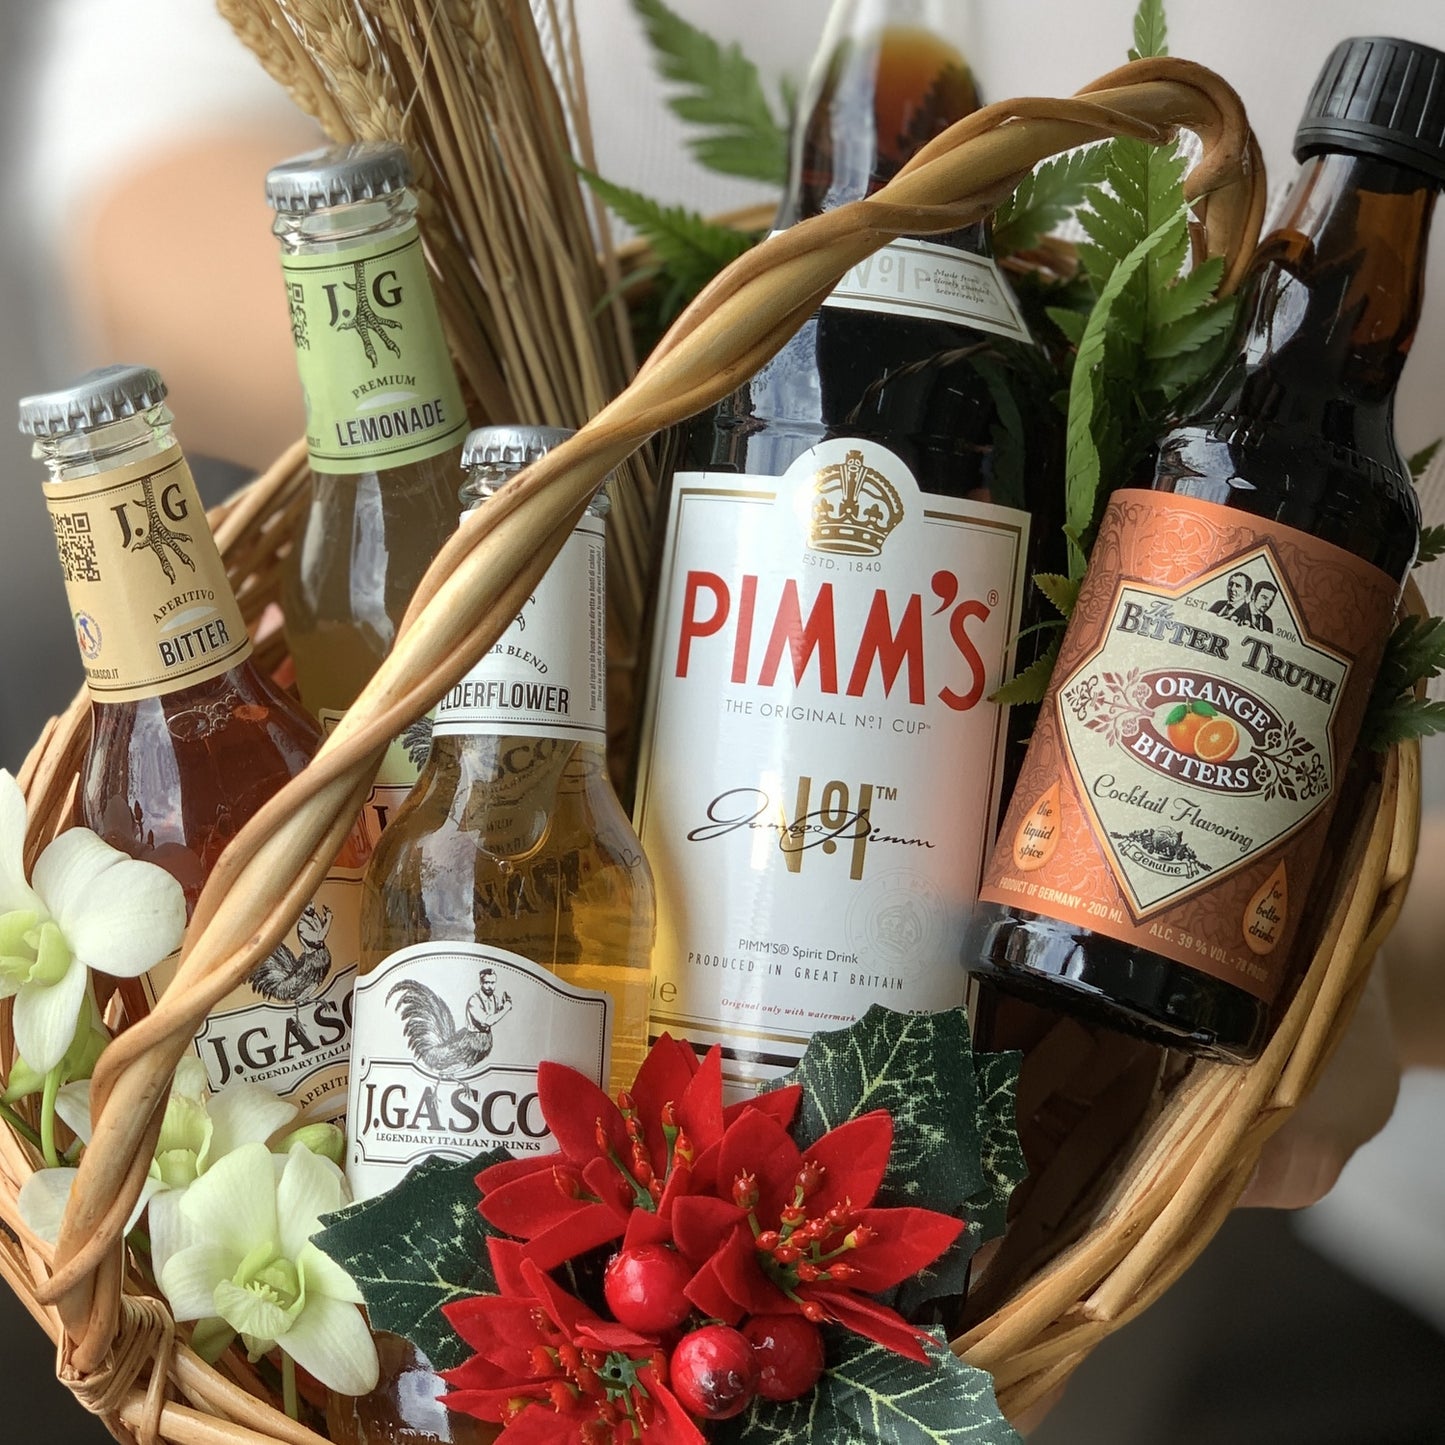 The Pimm's Cup Mixology Hamper